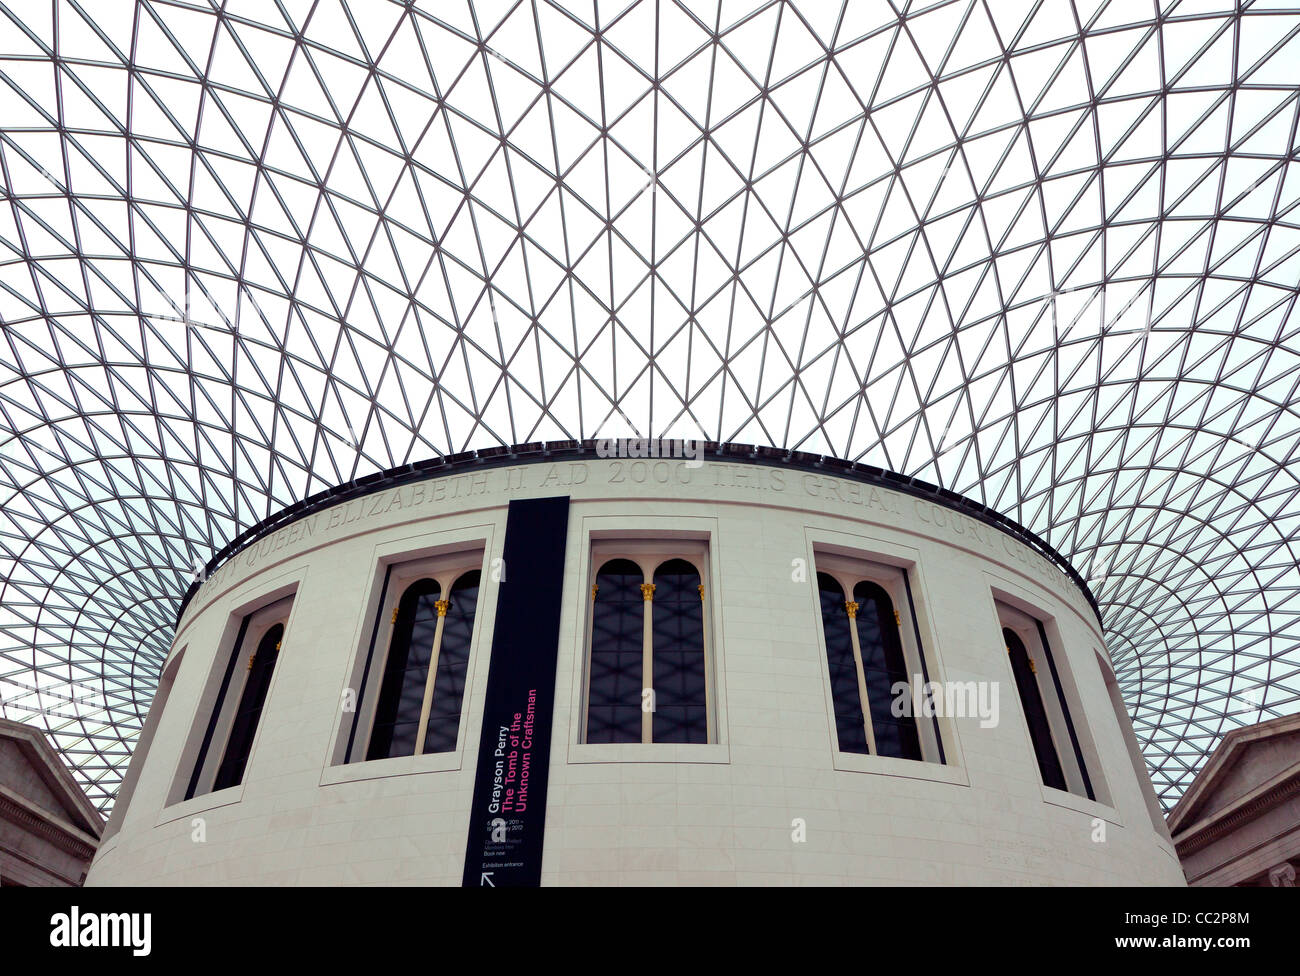 The British Museum, Great Court Ceiling, London Stock Photo